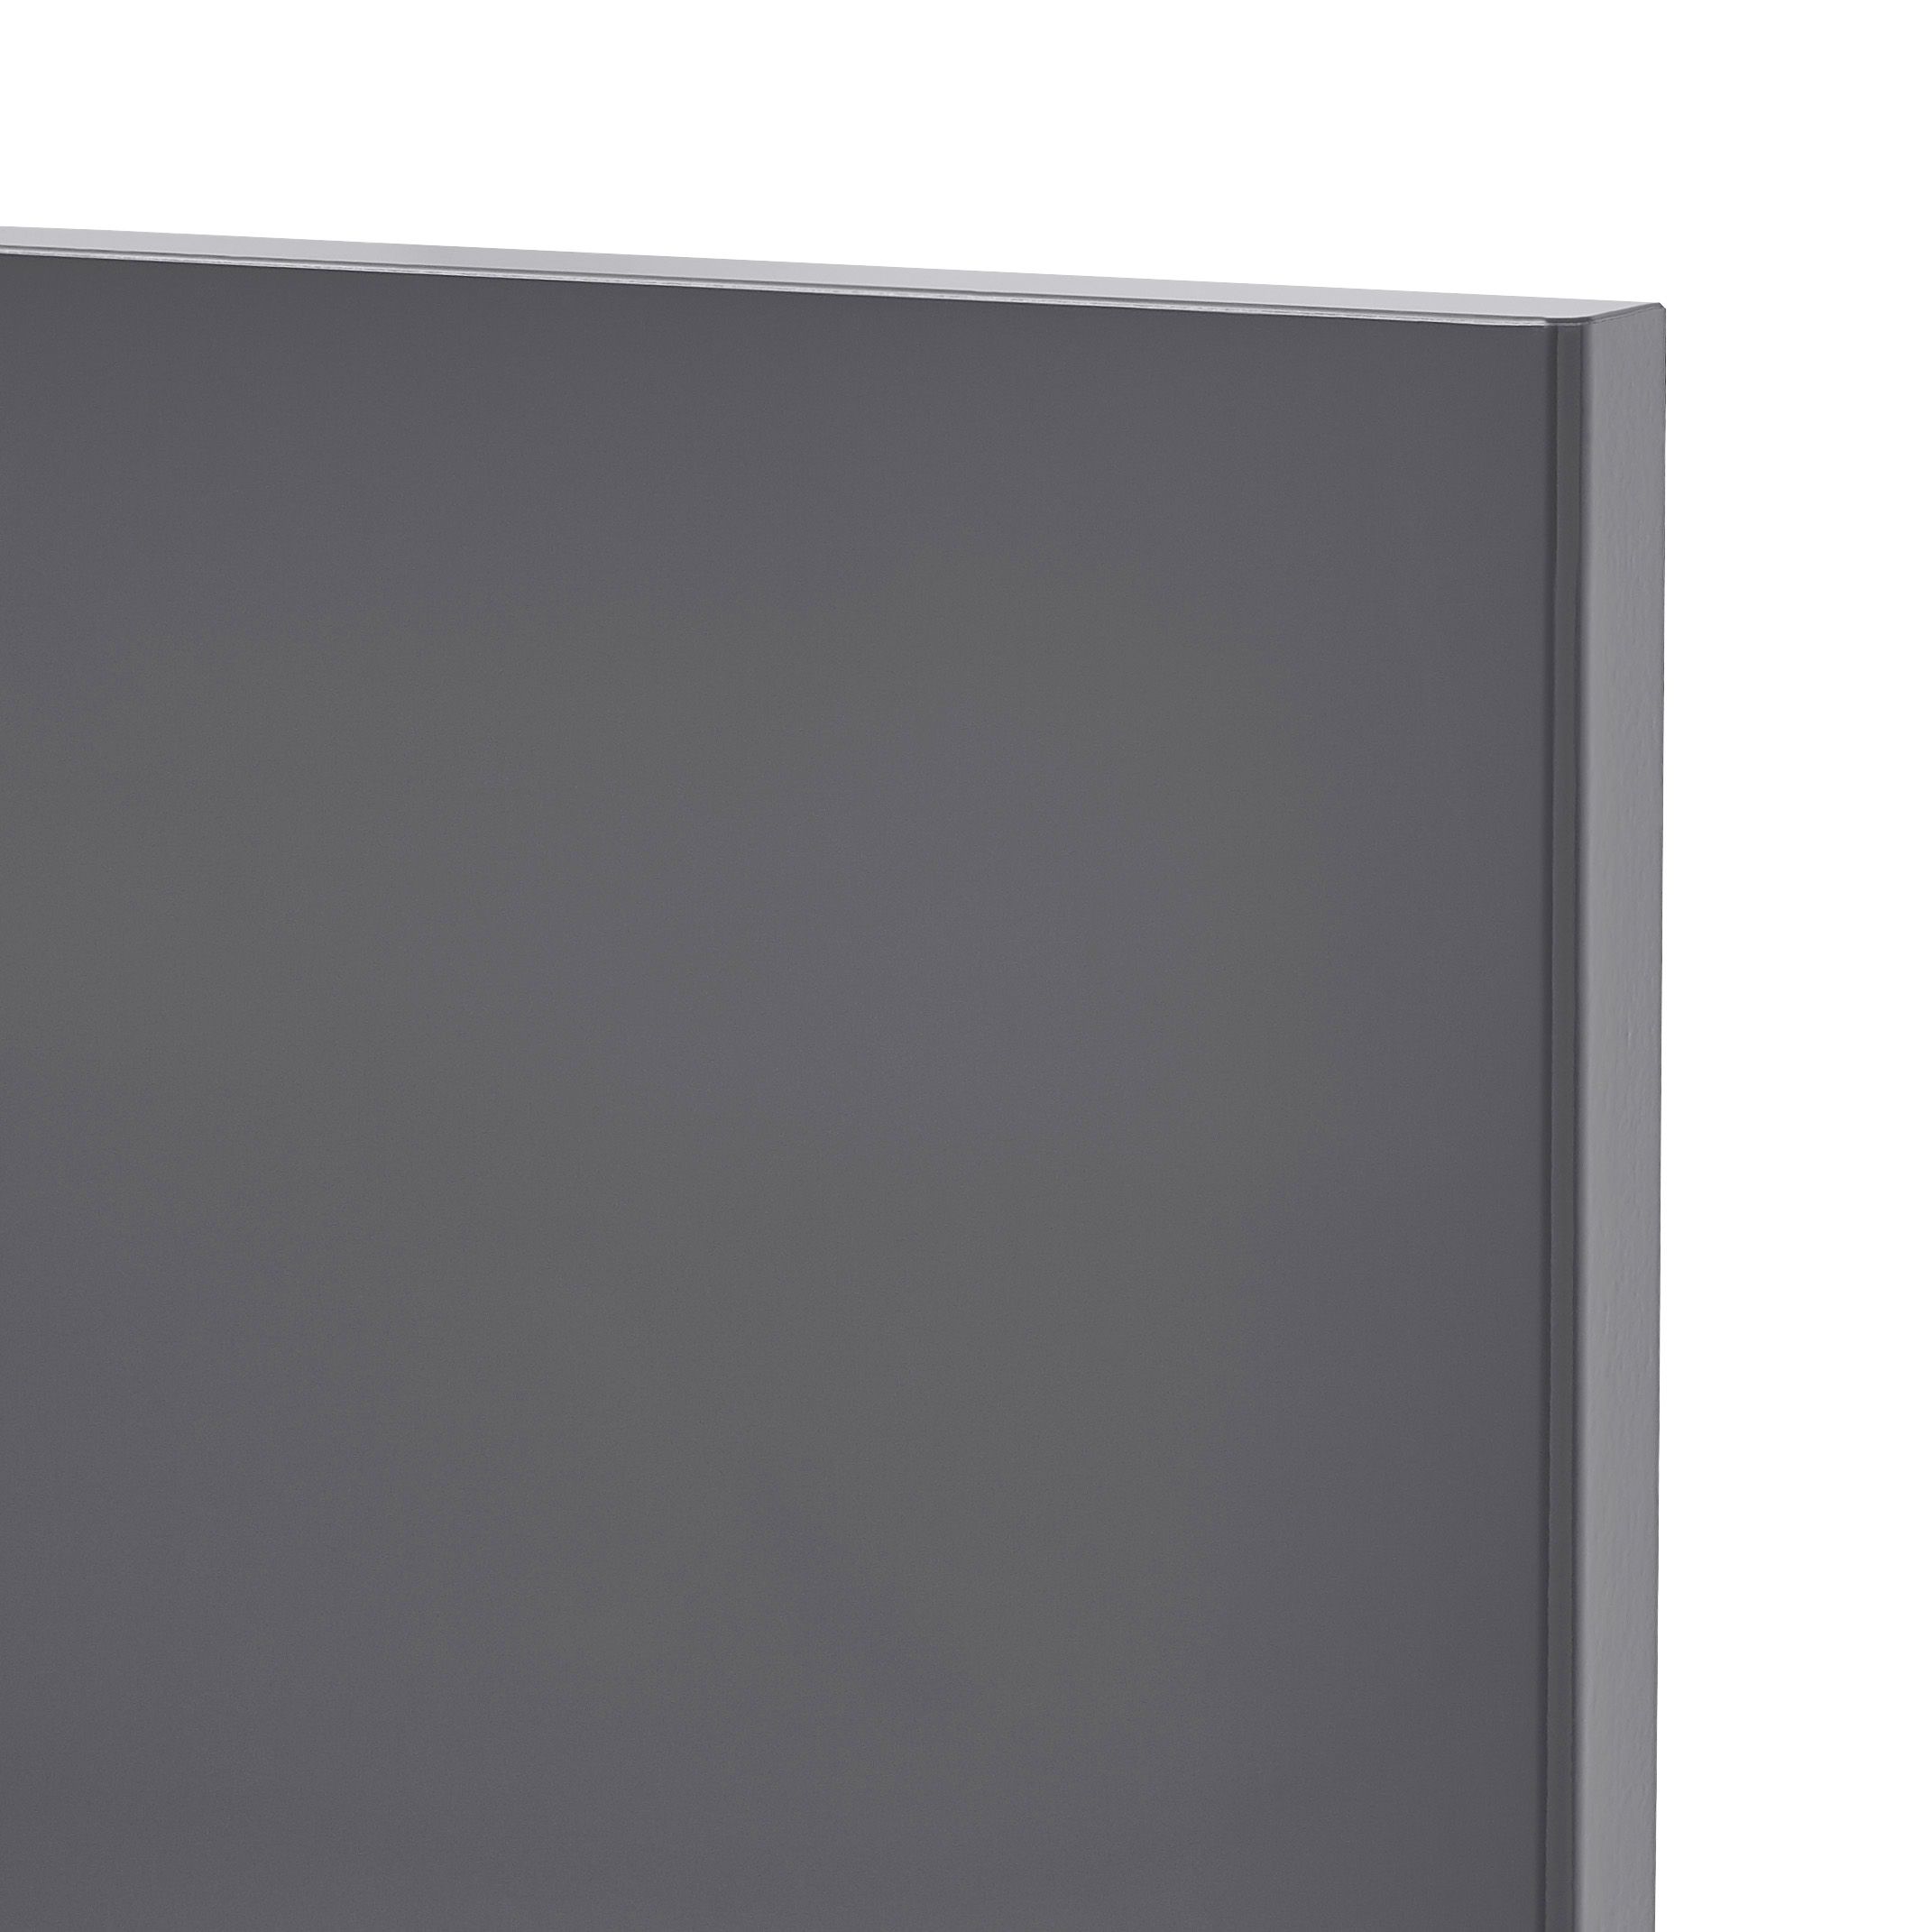 GoodHome Stevia Gloss anthracite slab Highline Cabinet door (W)400mm (H)715mm (T)18mm